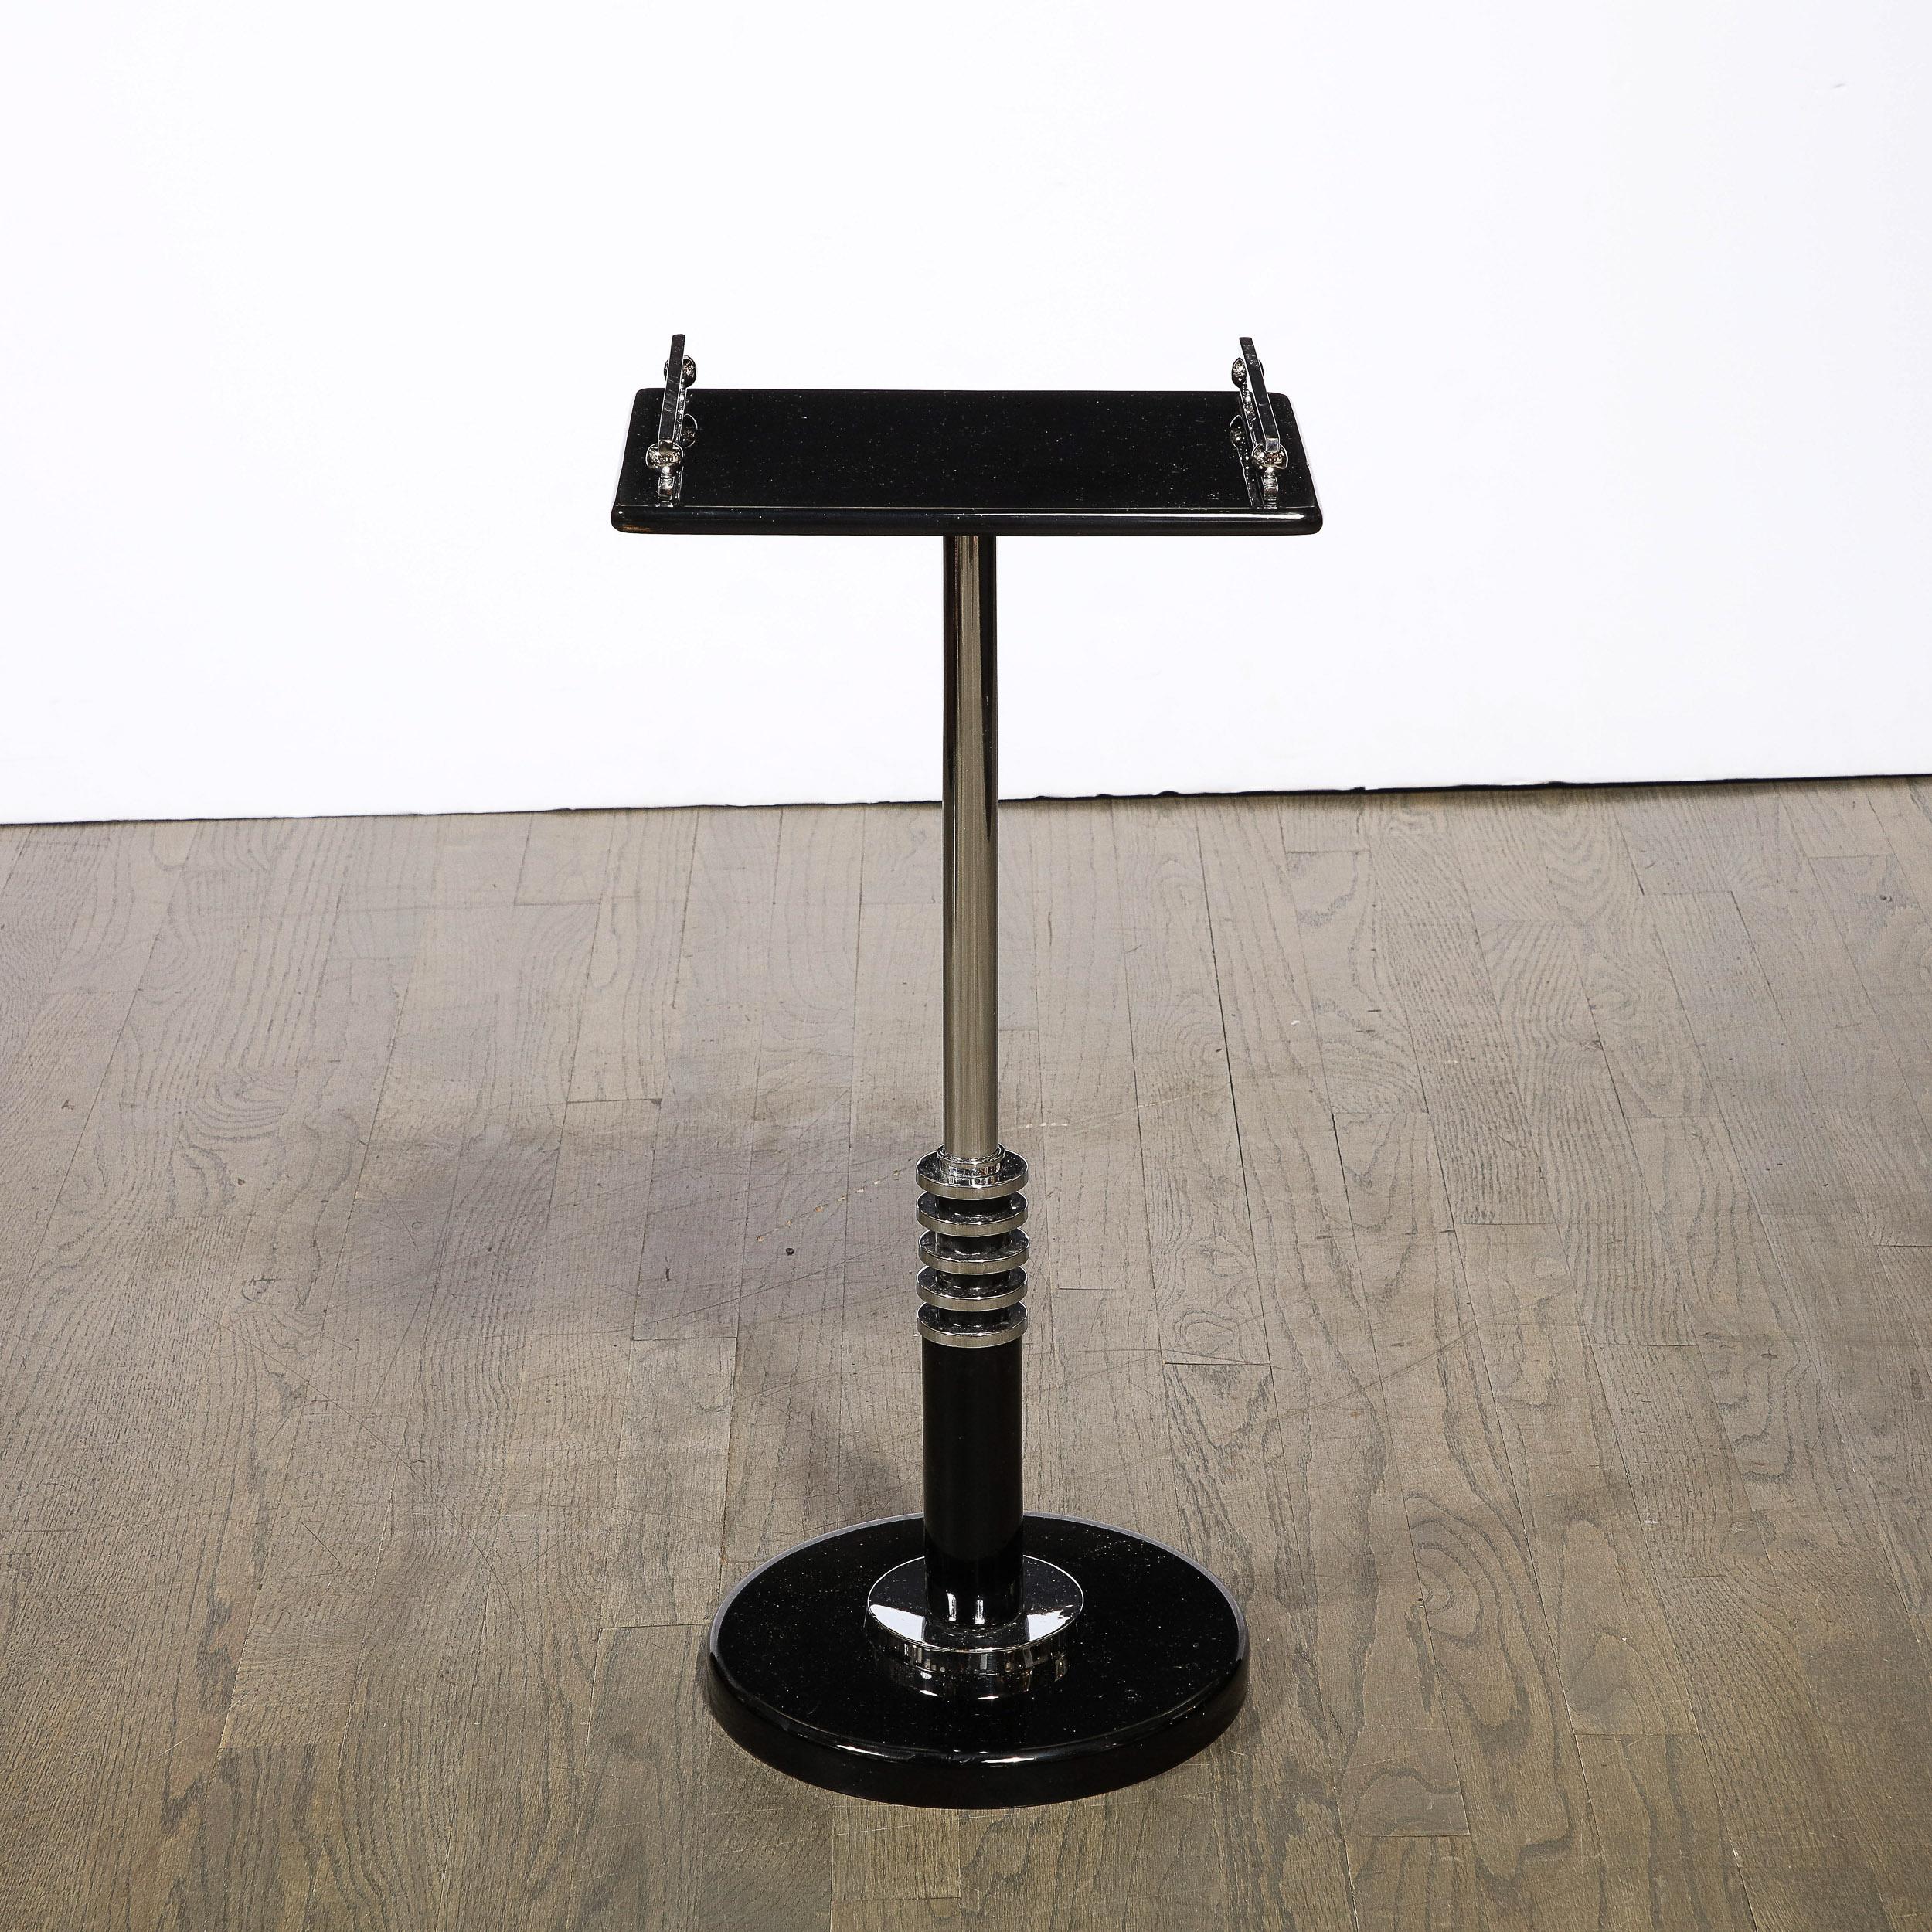 This stunning and graphic Art Deco Machine age drinks table was realized in the United States circa 1935. It features a skyscraper style tiered base consisting of a lustrous chrome circular form sitting on a black lacquer base of the same shape. A